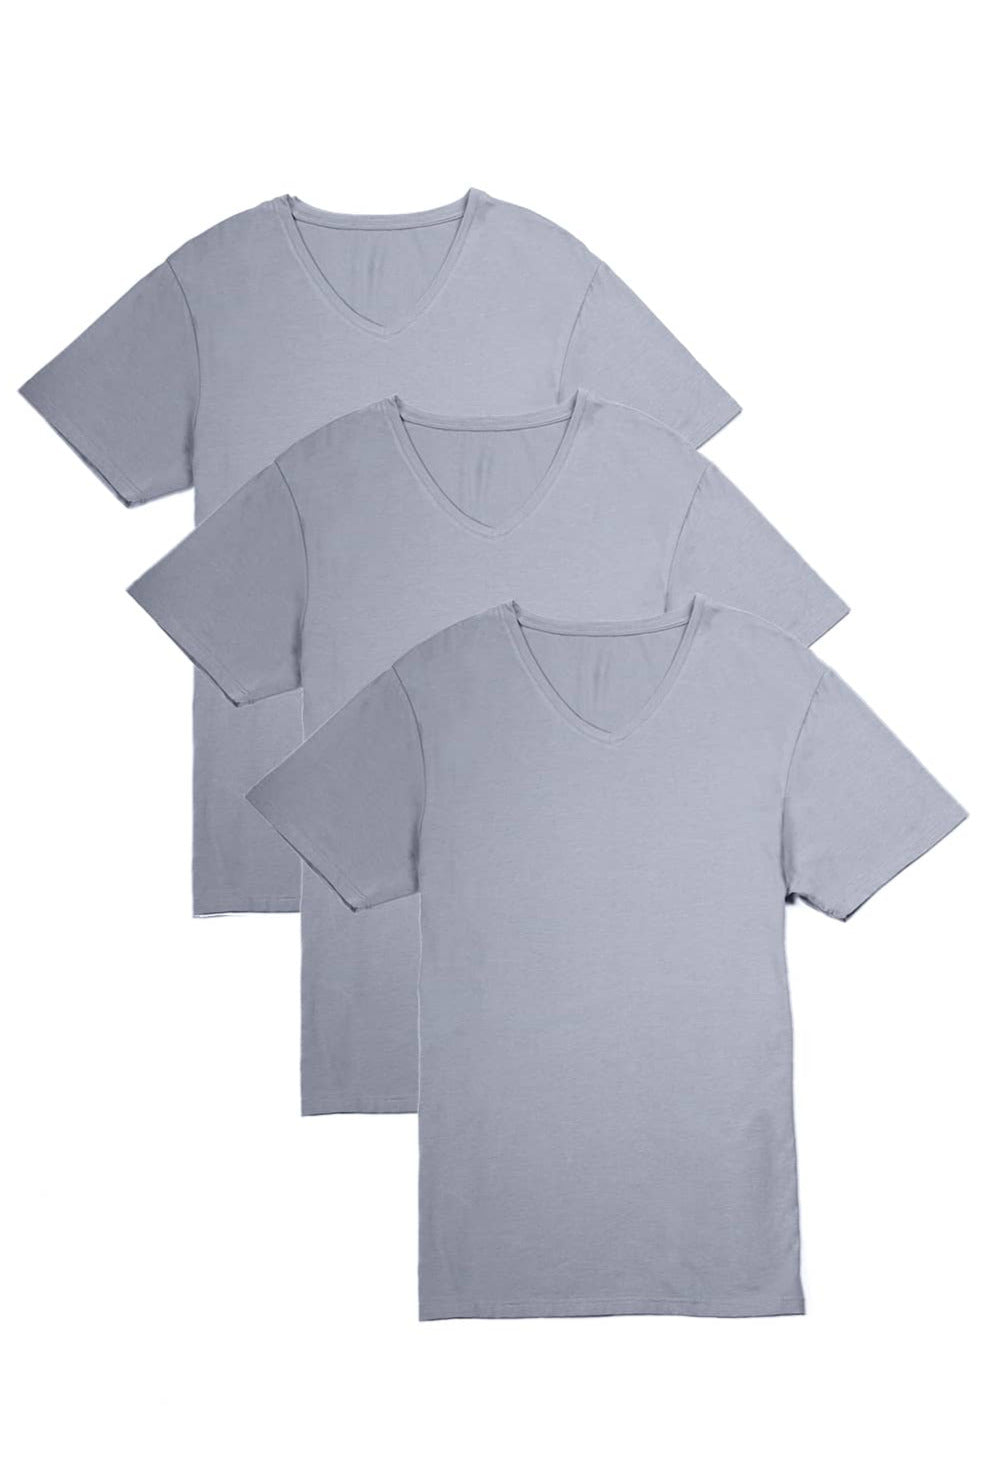 Men's Classic Fit Soft Stretch V-Neck Undershirt Mens>Casual>Tops Fishers Finery Sky Gray Small 3 Pack